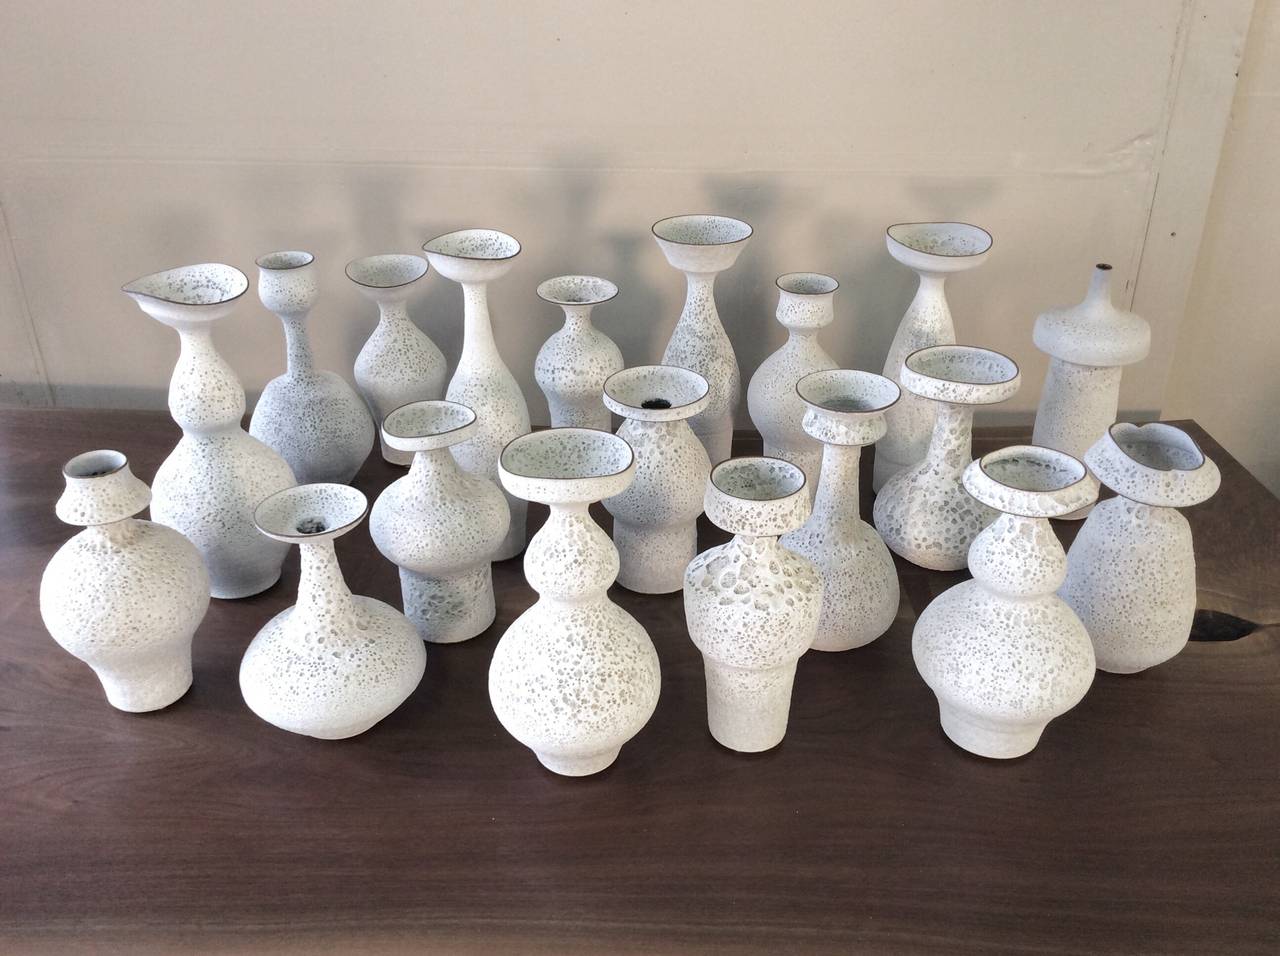 Handmade studio pottery vases in a white crater glaze by working studio potter, Jeremy Briddell (b.1971). Pieces shown here range from 10